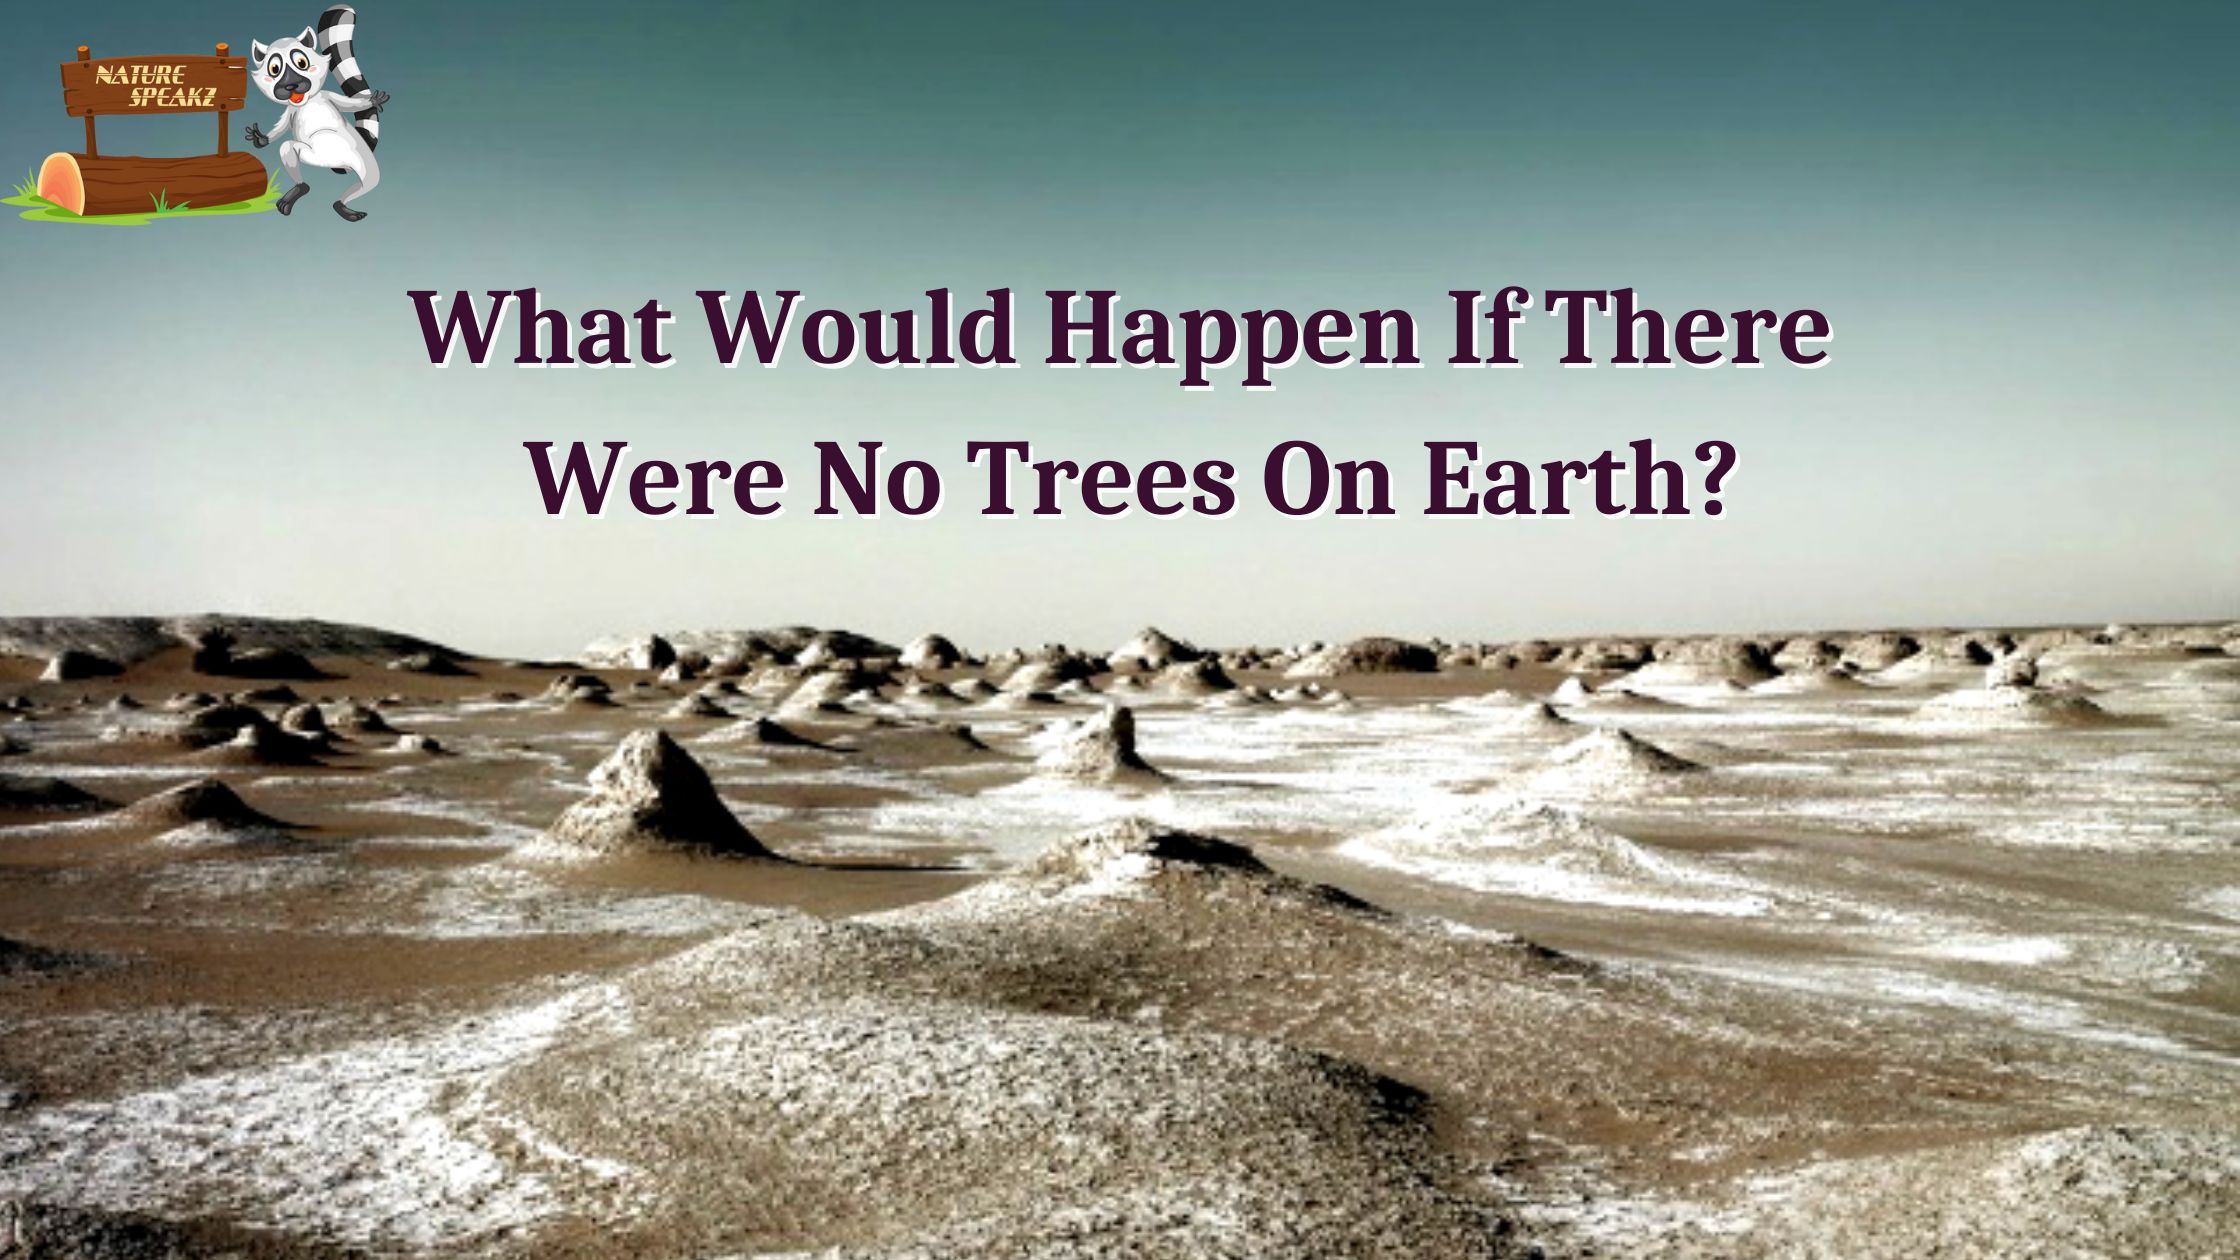 What Would Happen If There Were No Trees On Earth?